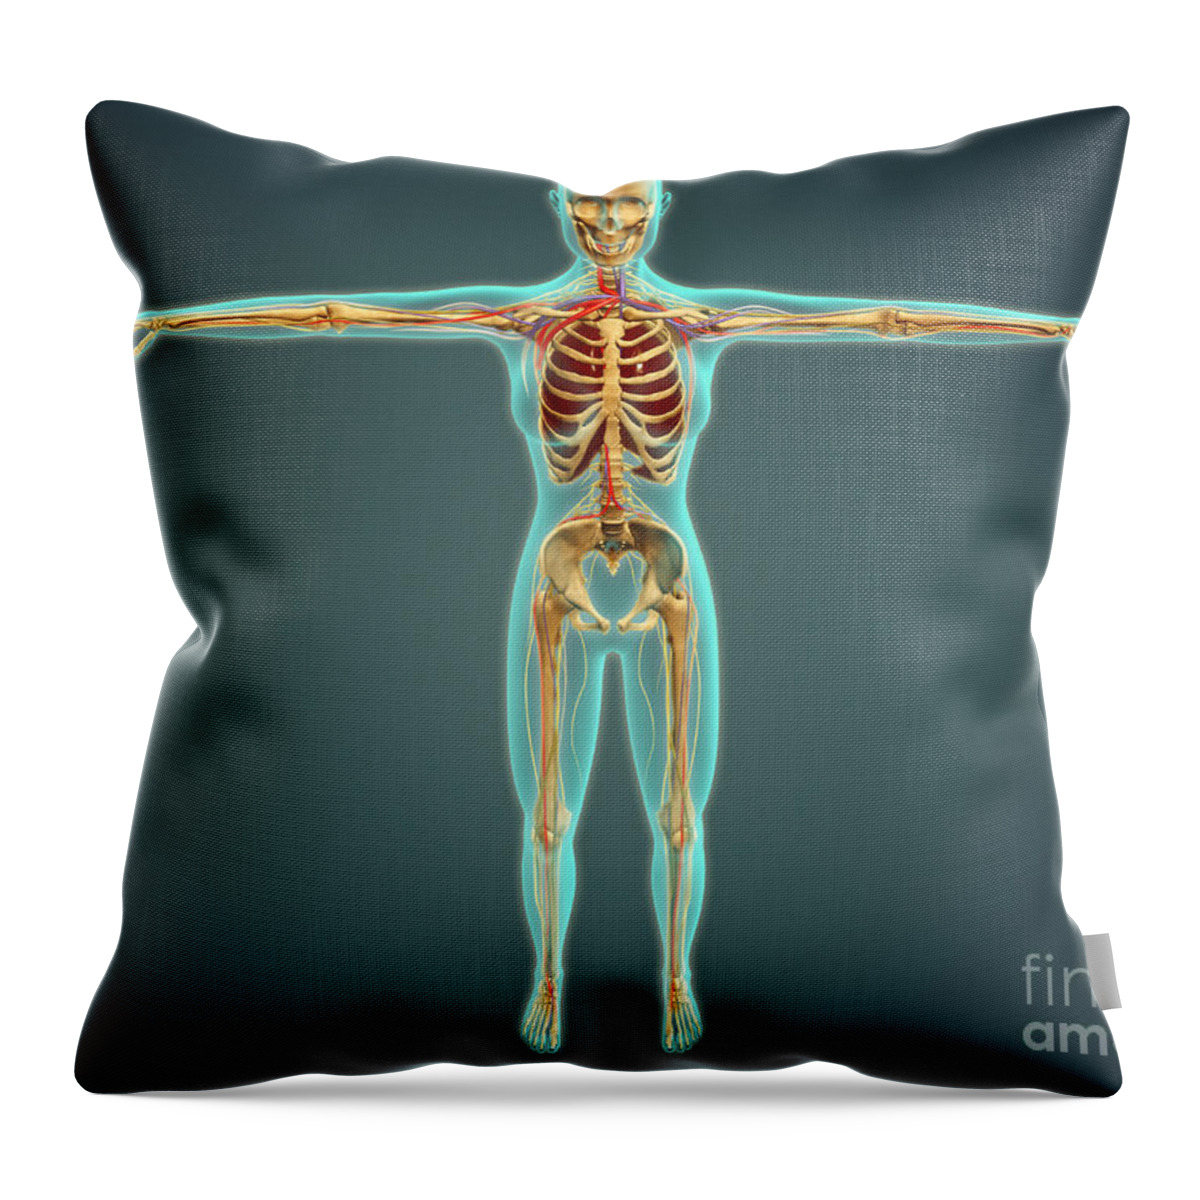 Pudendal Nerves Pillows & Cushions for Sale